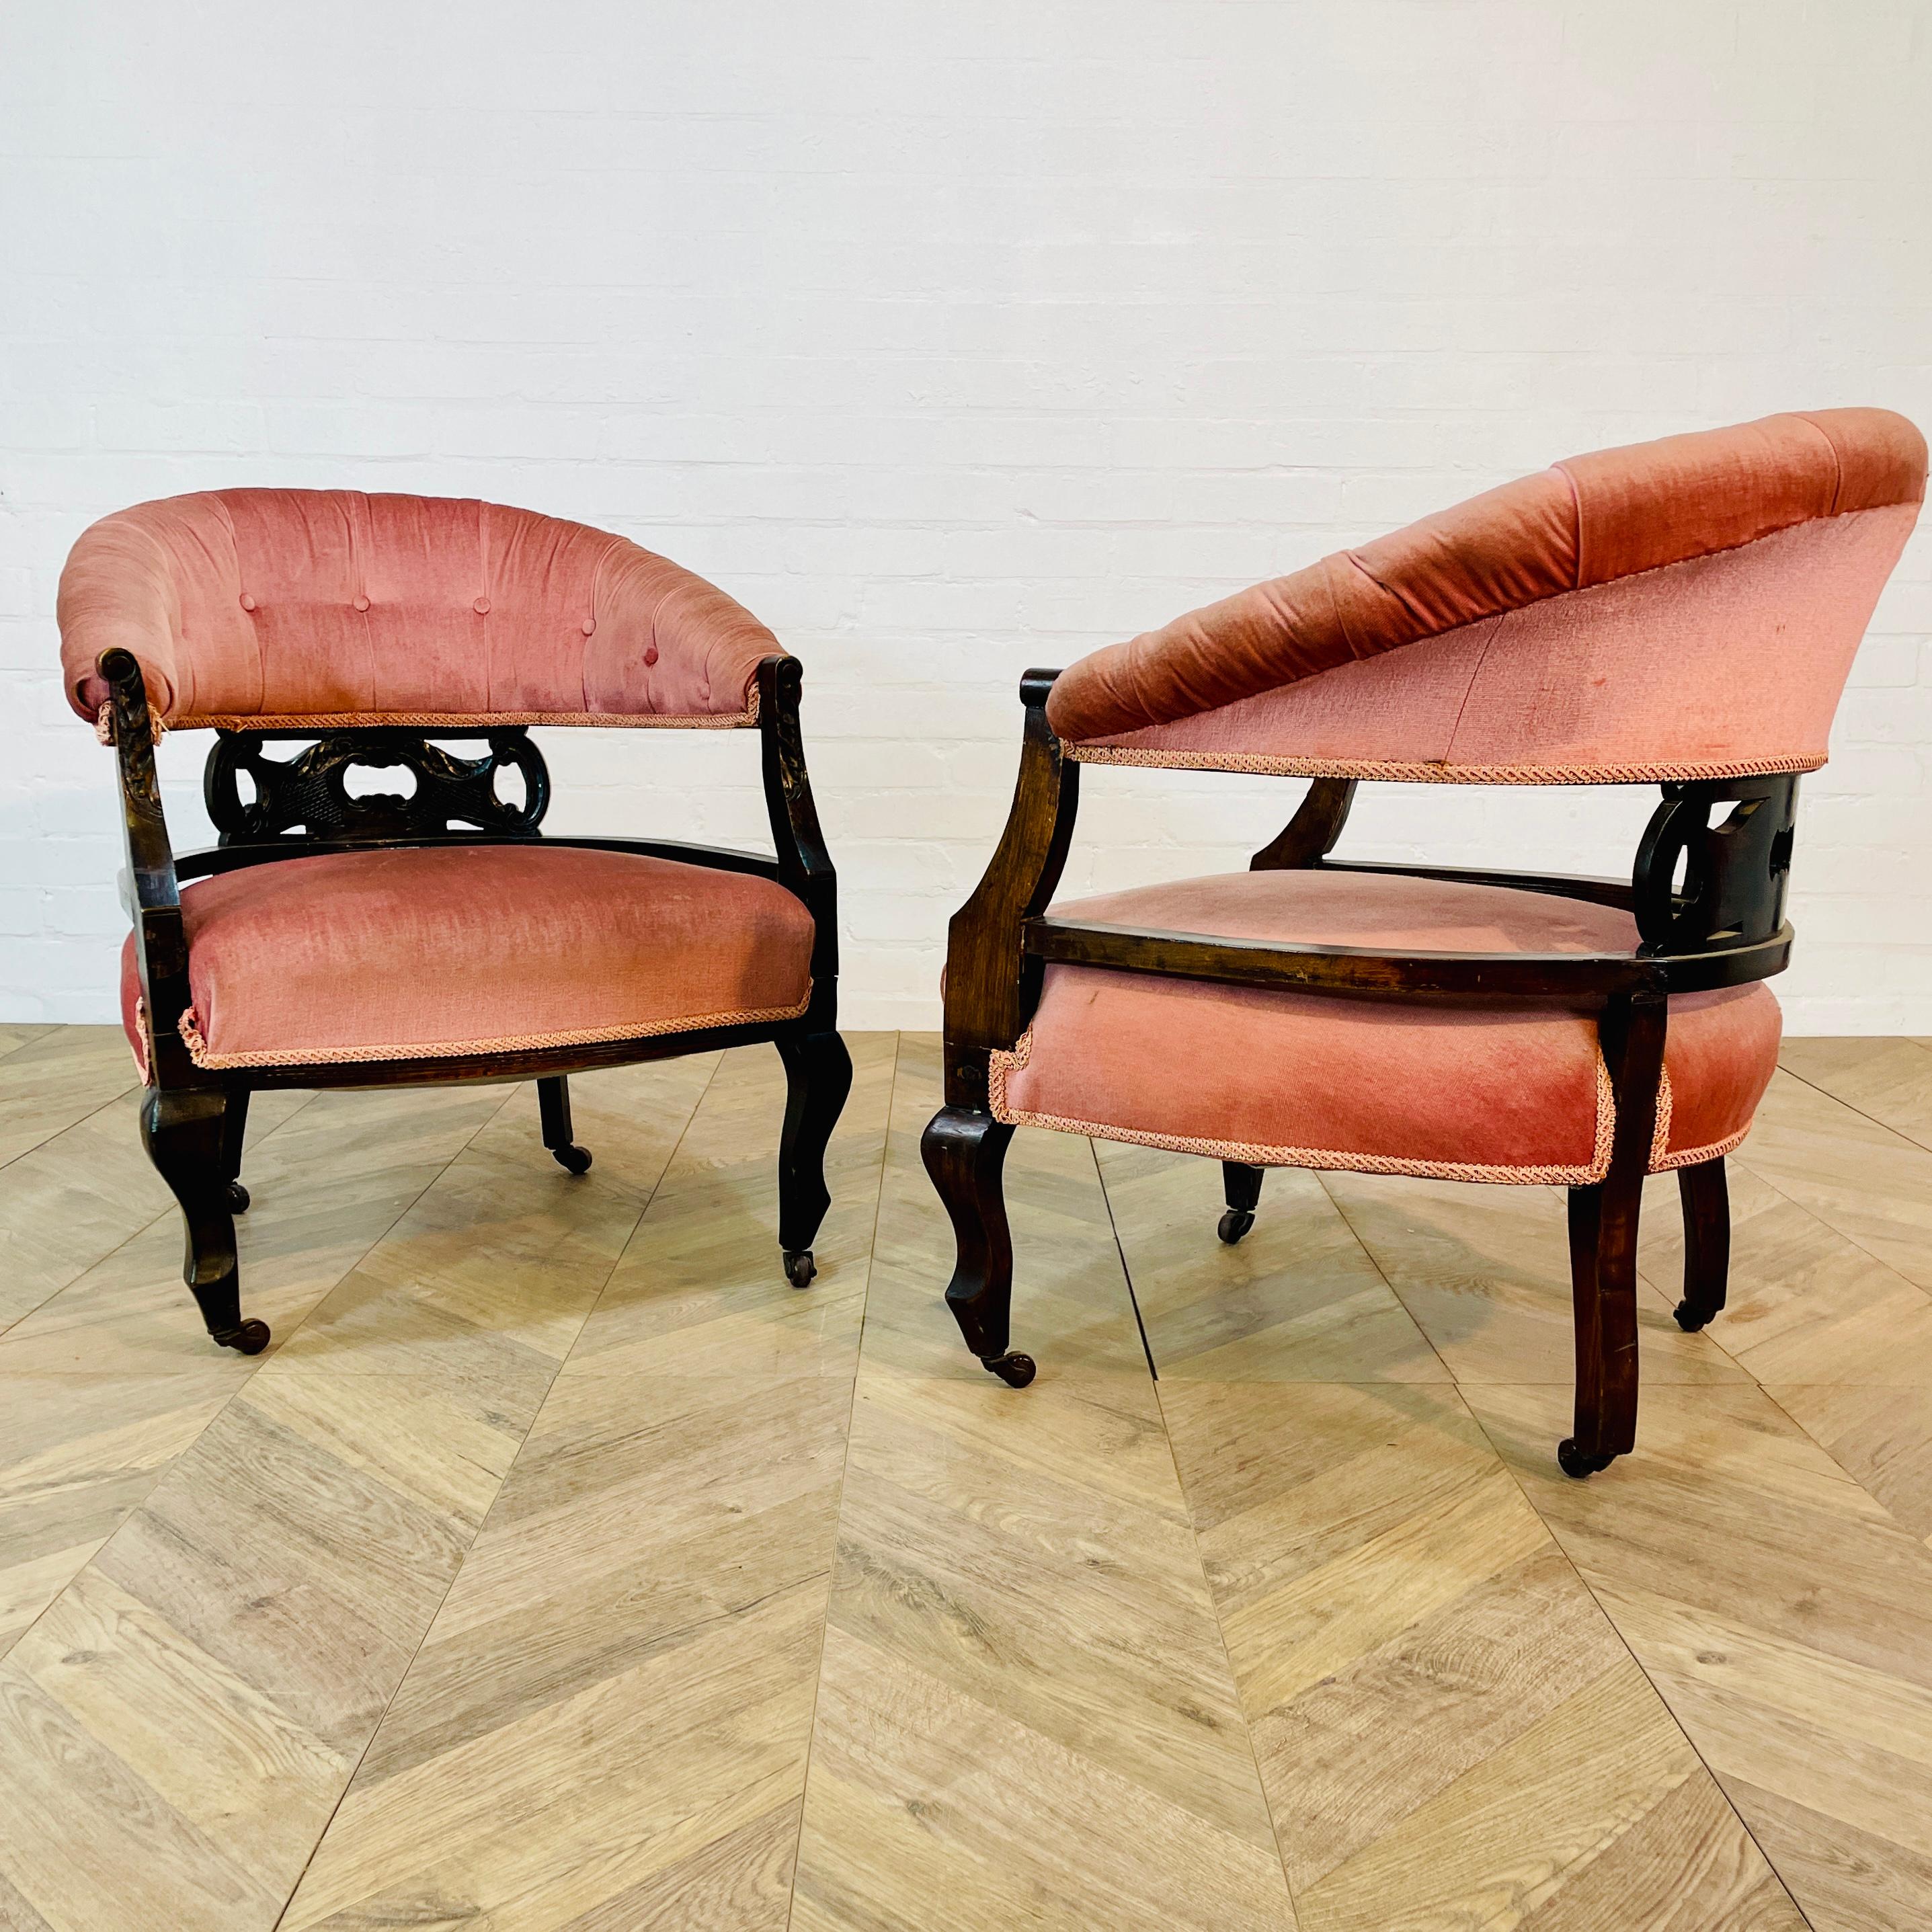 British Antique English Edwardian Low Open Armchairs, Set of 2, circa 1900s For Sale